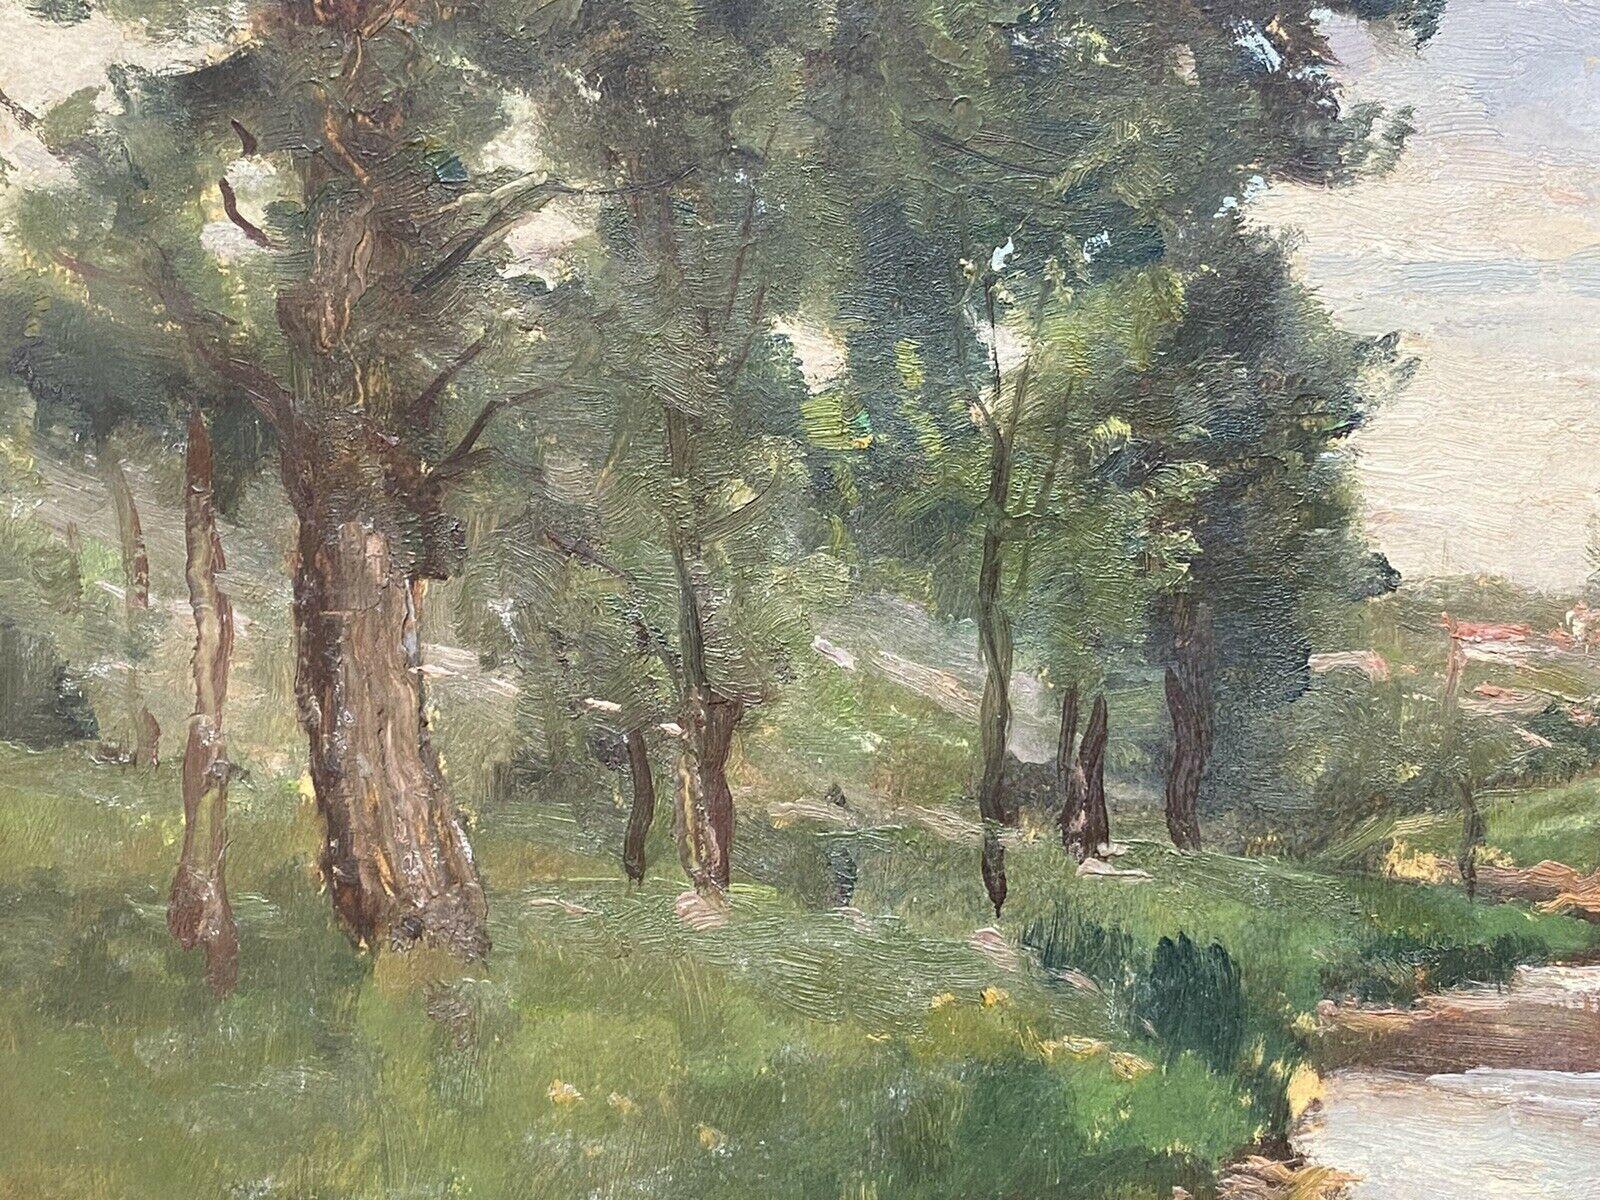 CURTELIN (FRENCH 1859-1912) EN PLEIN AIR IMPRESSIONIST OIL - RIVER LANDSCAPE - Impressionist Painting by CHARLES CURTELIN (FRENCH 1859-1912